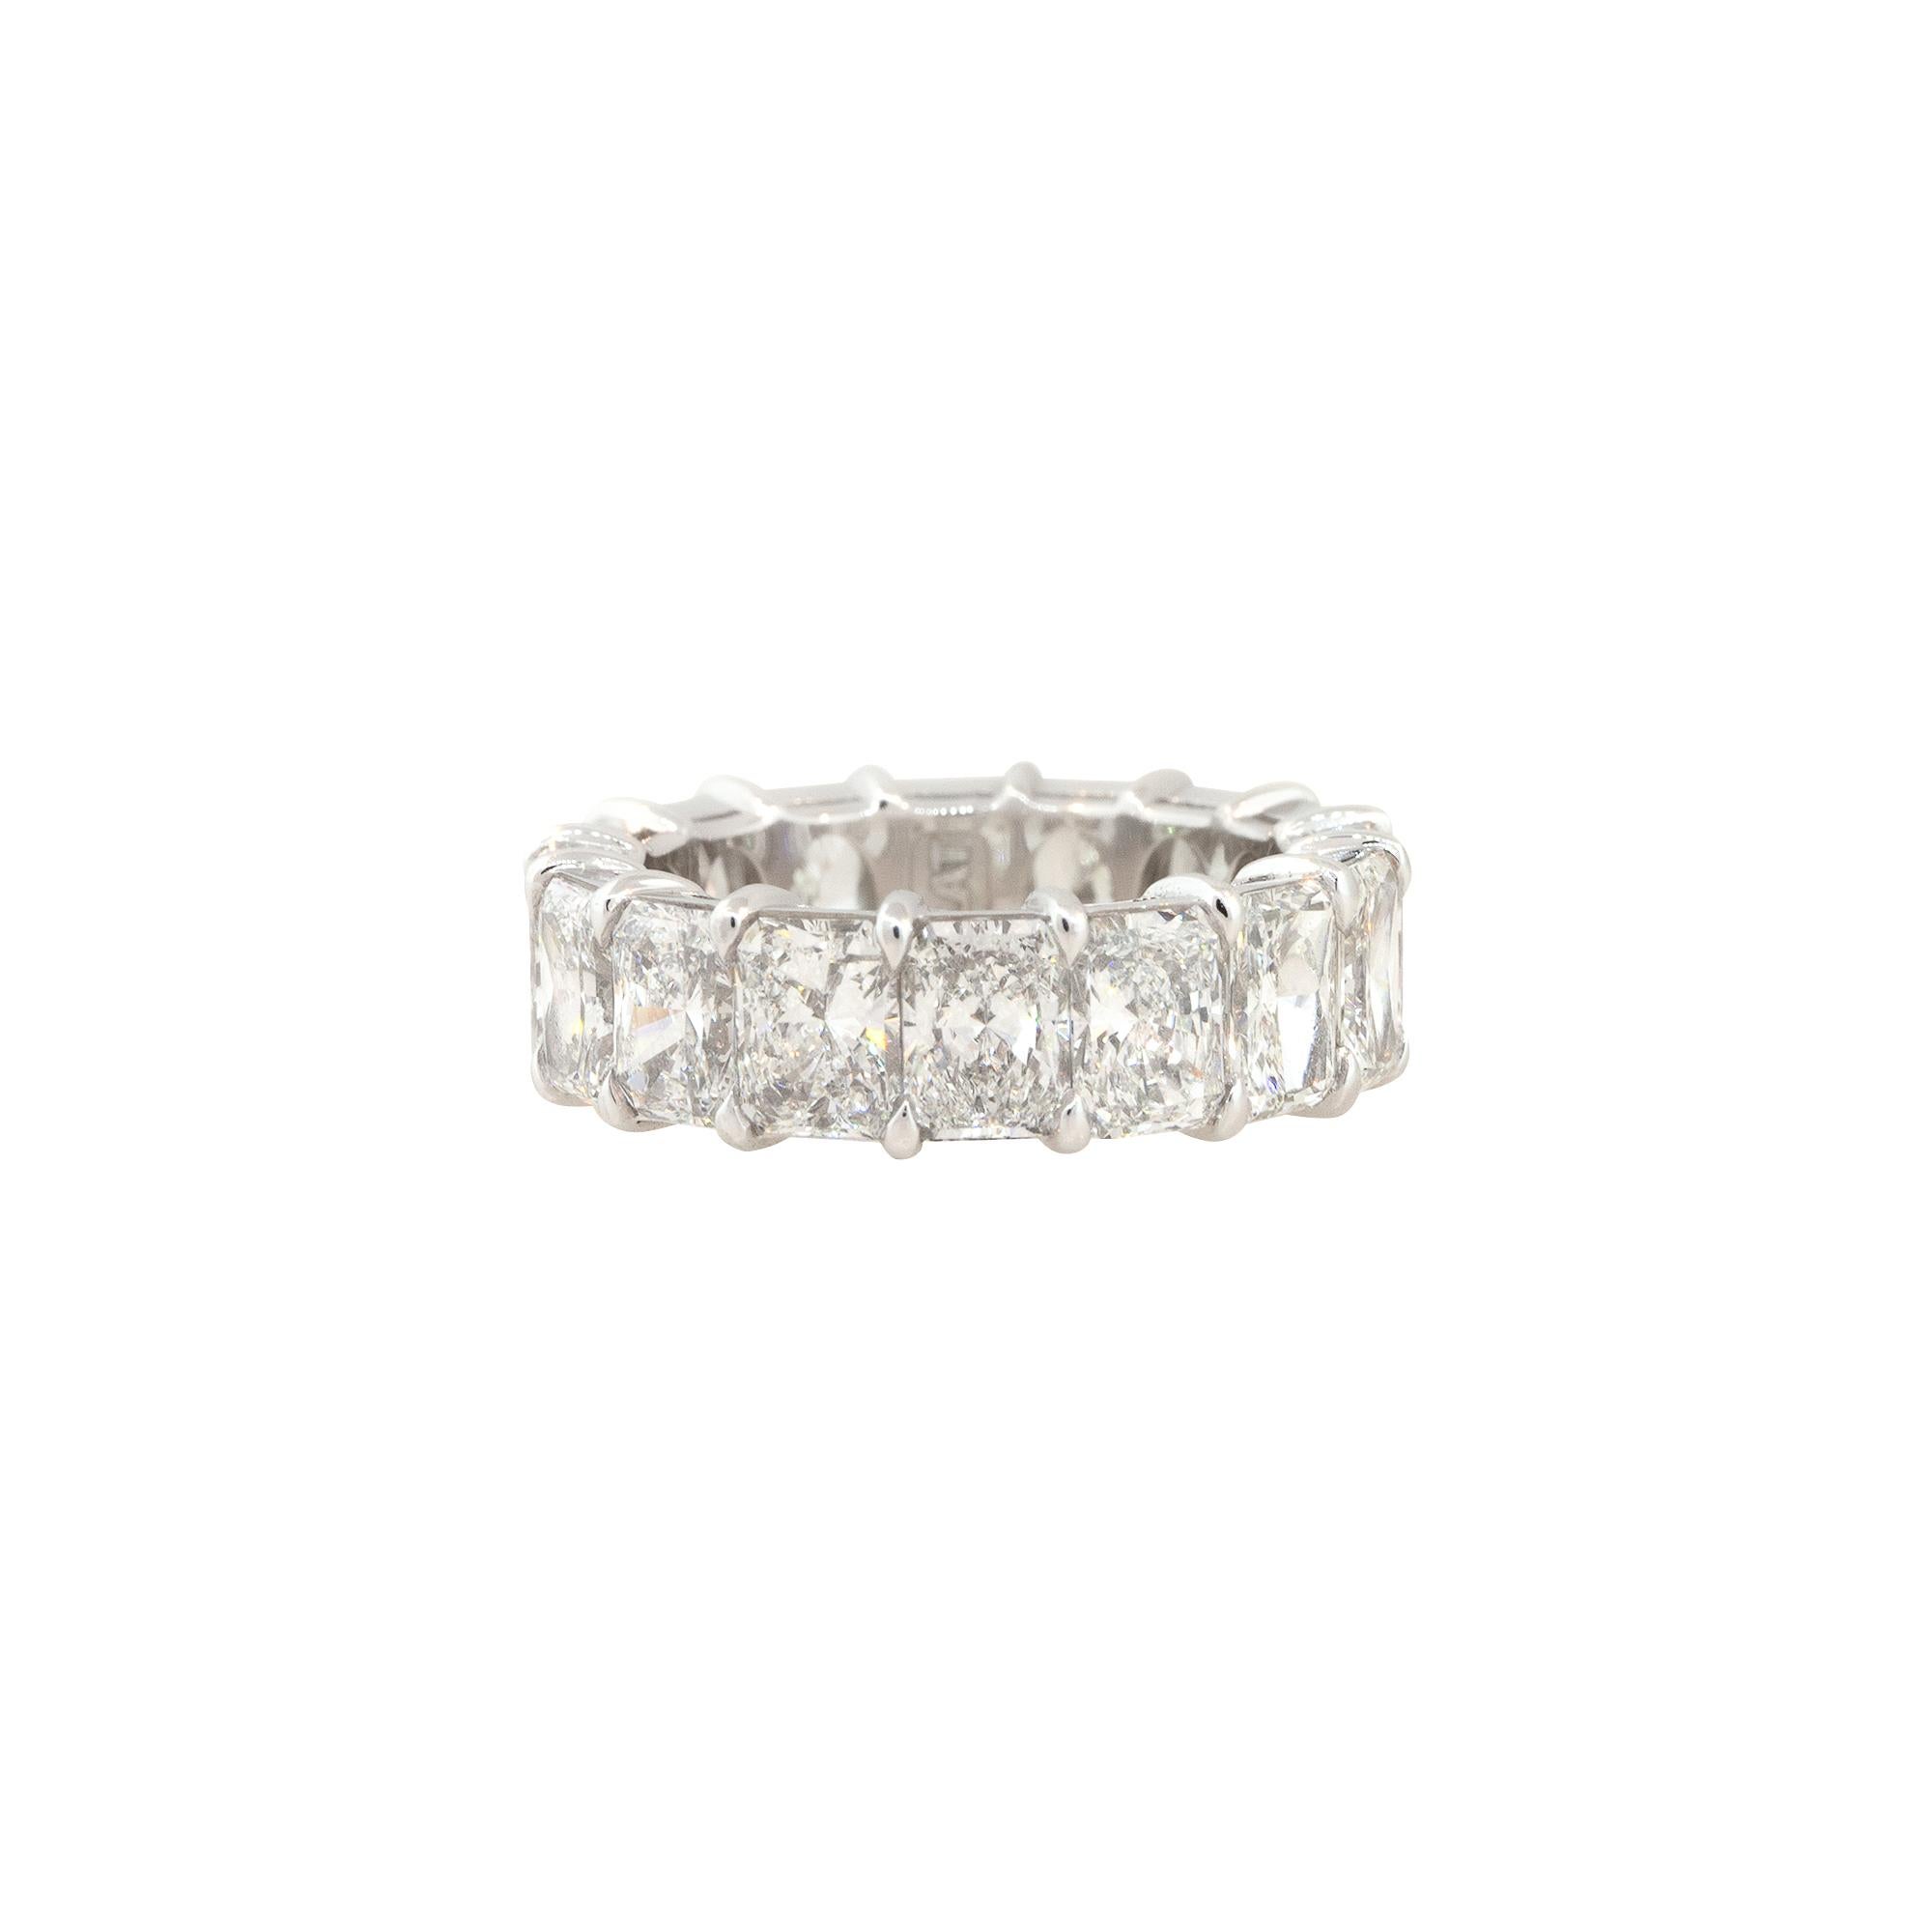 Eternity Band Details: Platinum 9.27 Carat Radiant Cut Diamond Eternity Ring in Platinum 

Material: Platinum
Diamond Details: There are approximately 9.27 carats of Radiant Cut Diamonds. Diamonds are prong set and there are 16 Diamonds total.